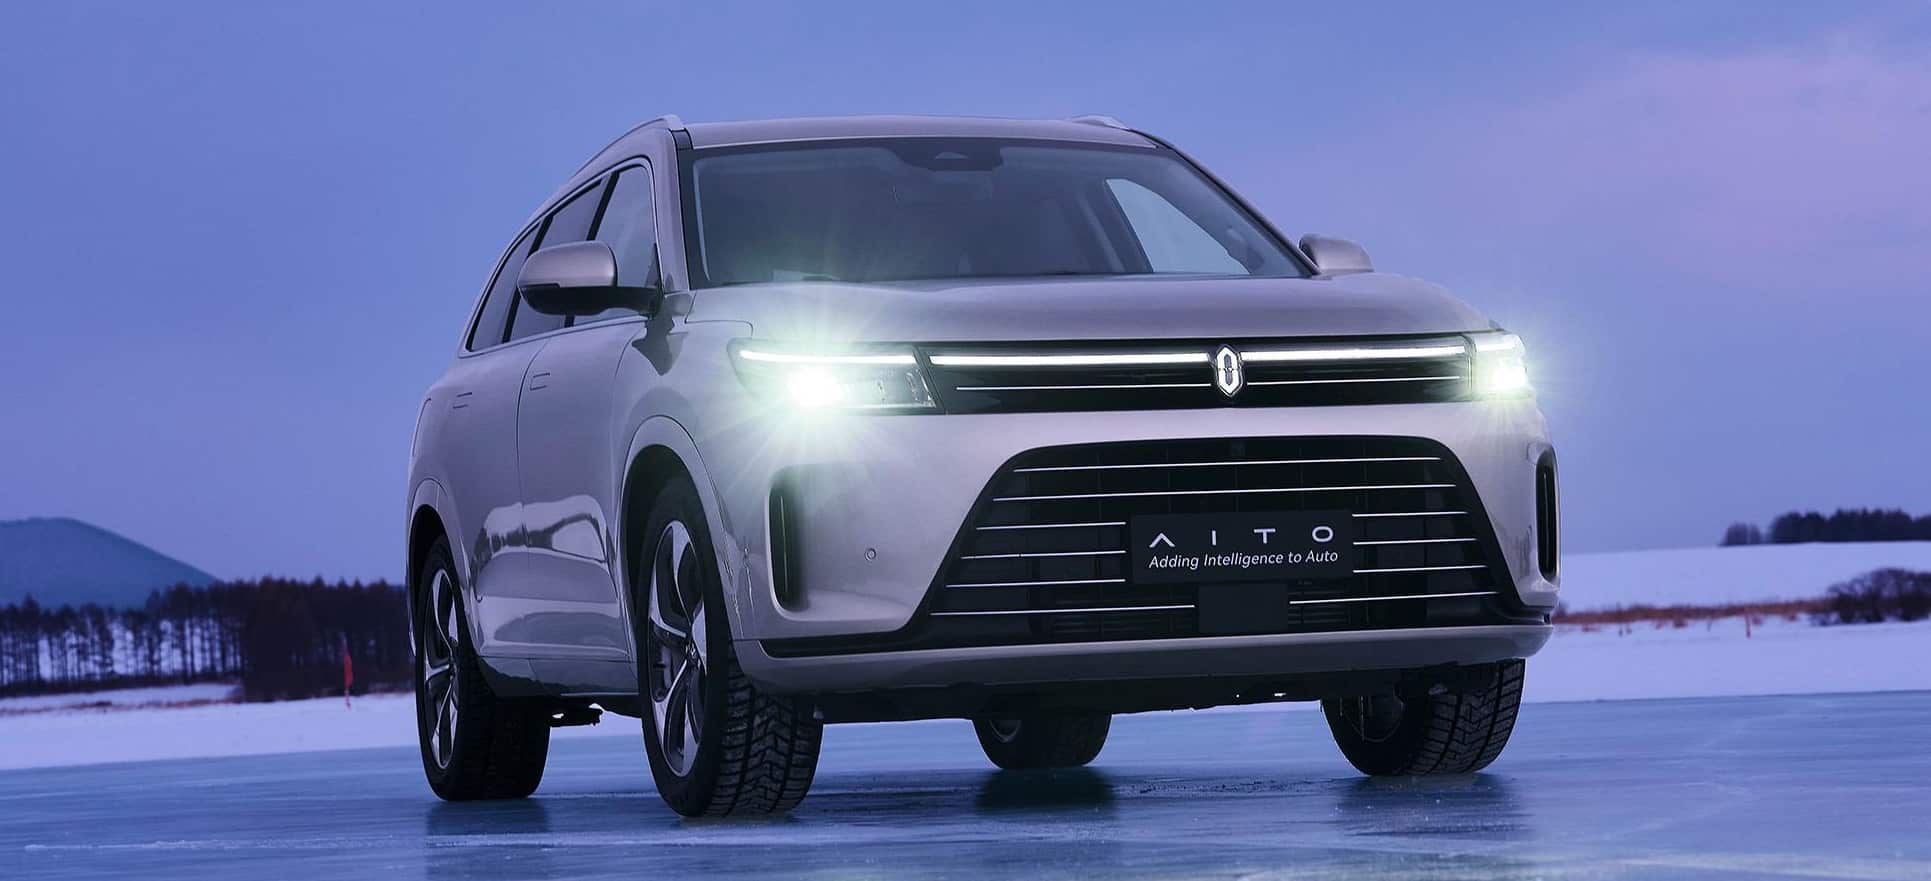 Huawei’s star was born. Aito M7 SUV received 100,000 orders in China